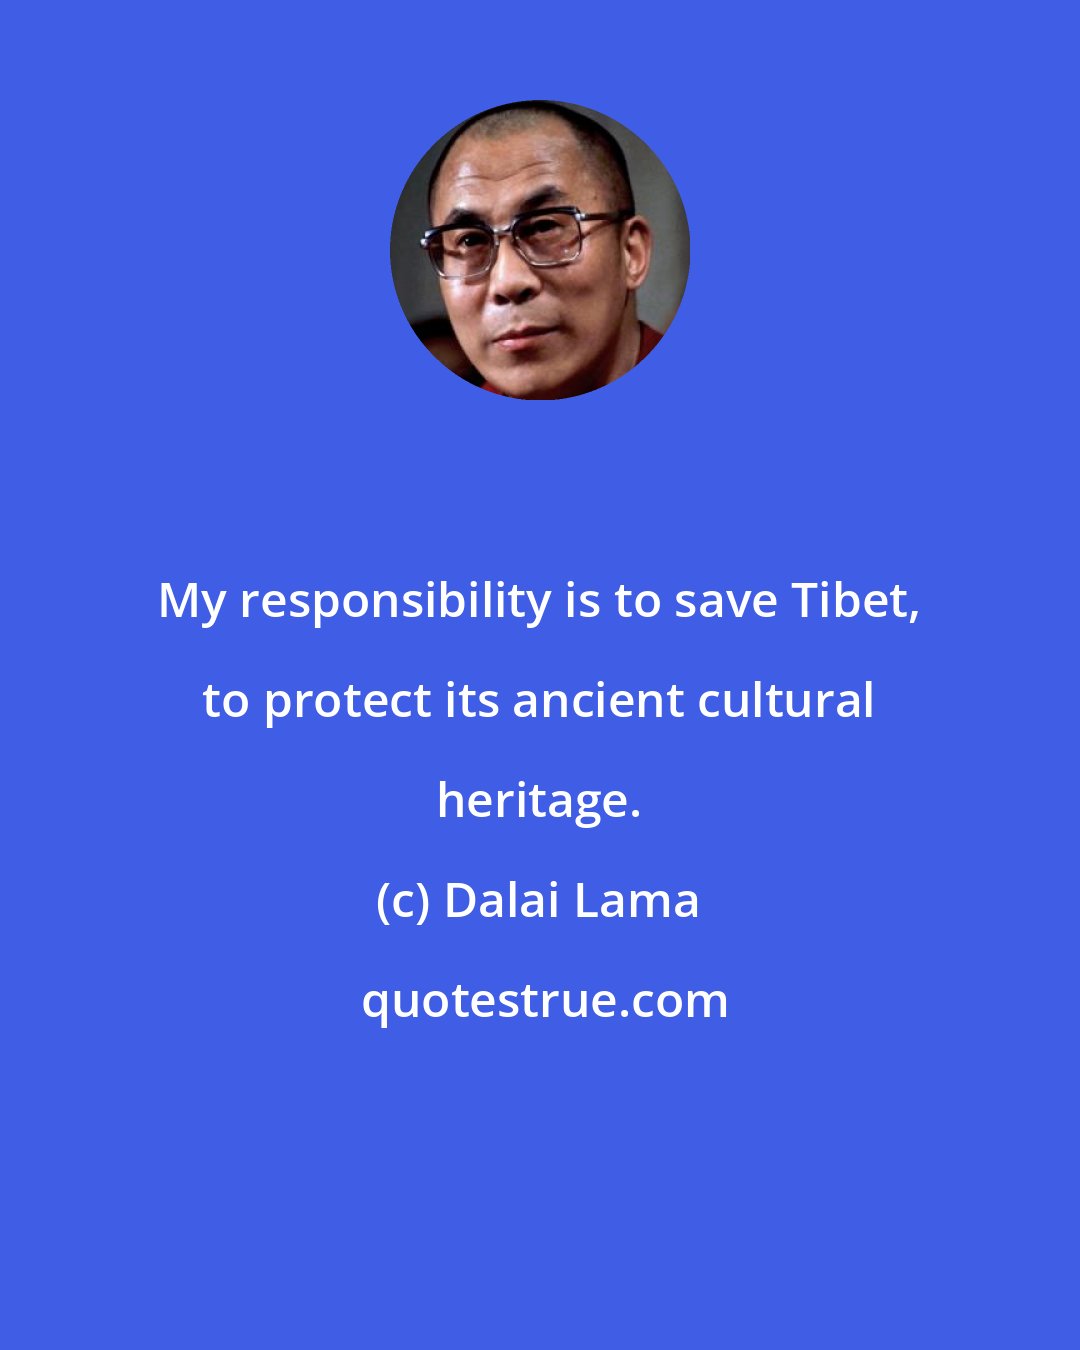 Dalai Lama: My responsibility is to save Tibet, to protect its ancient cultural heritage.